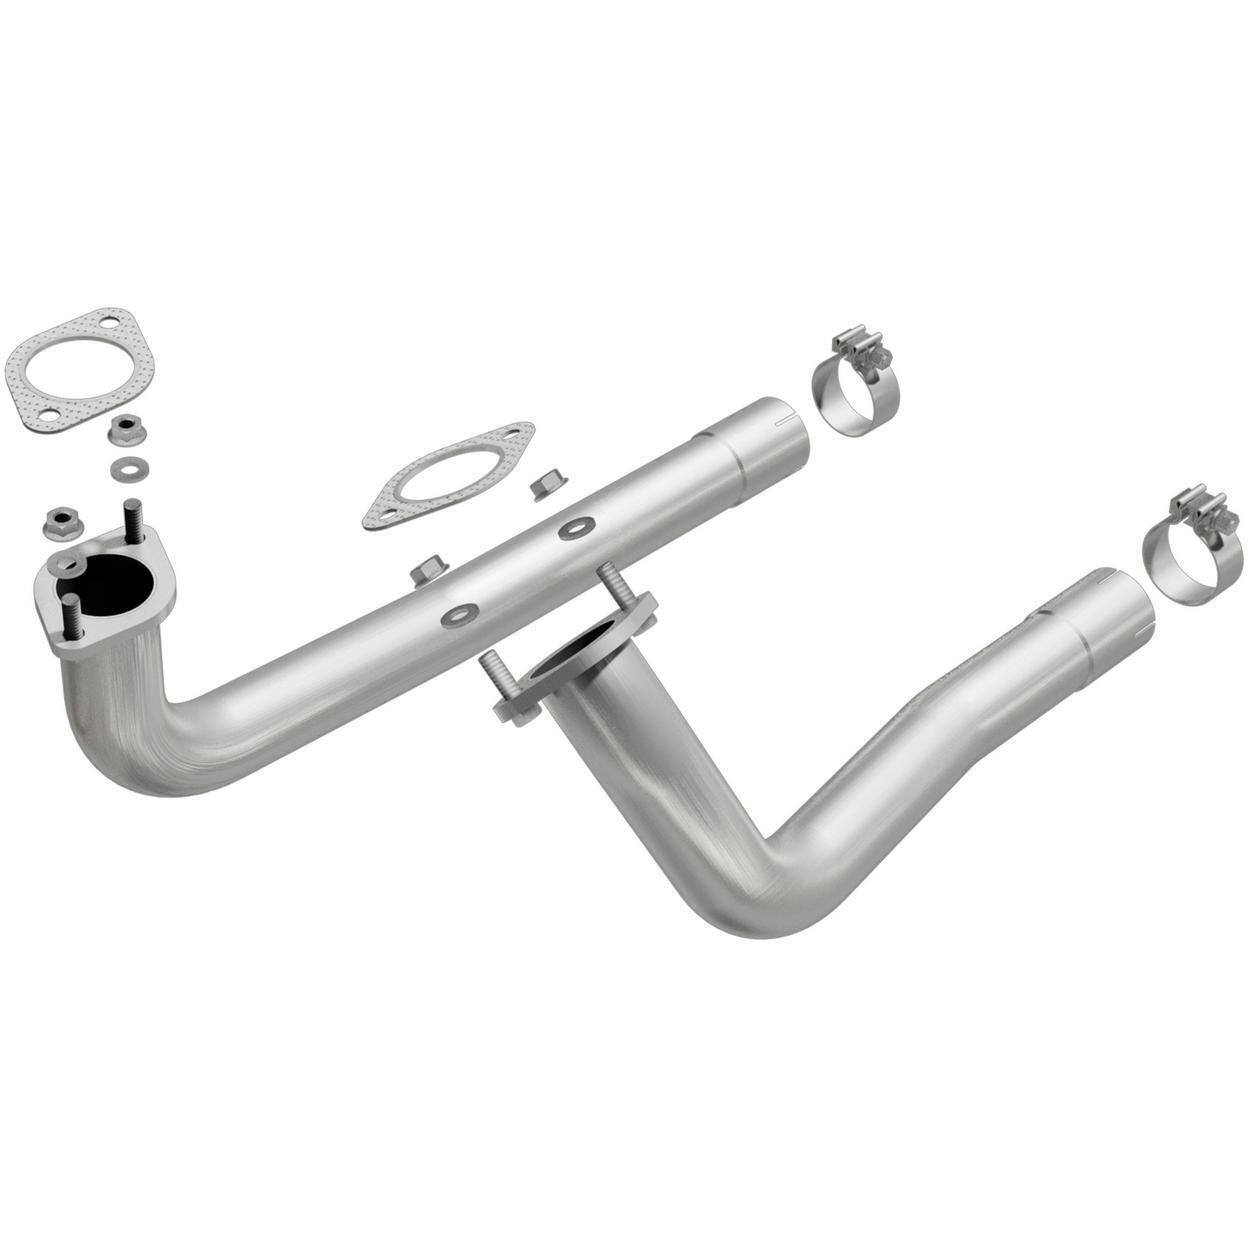 Exhaust and Tail Pipes for 1966-1967 Plymouth Belvedere 7.2L V8 GAS OHV